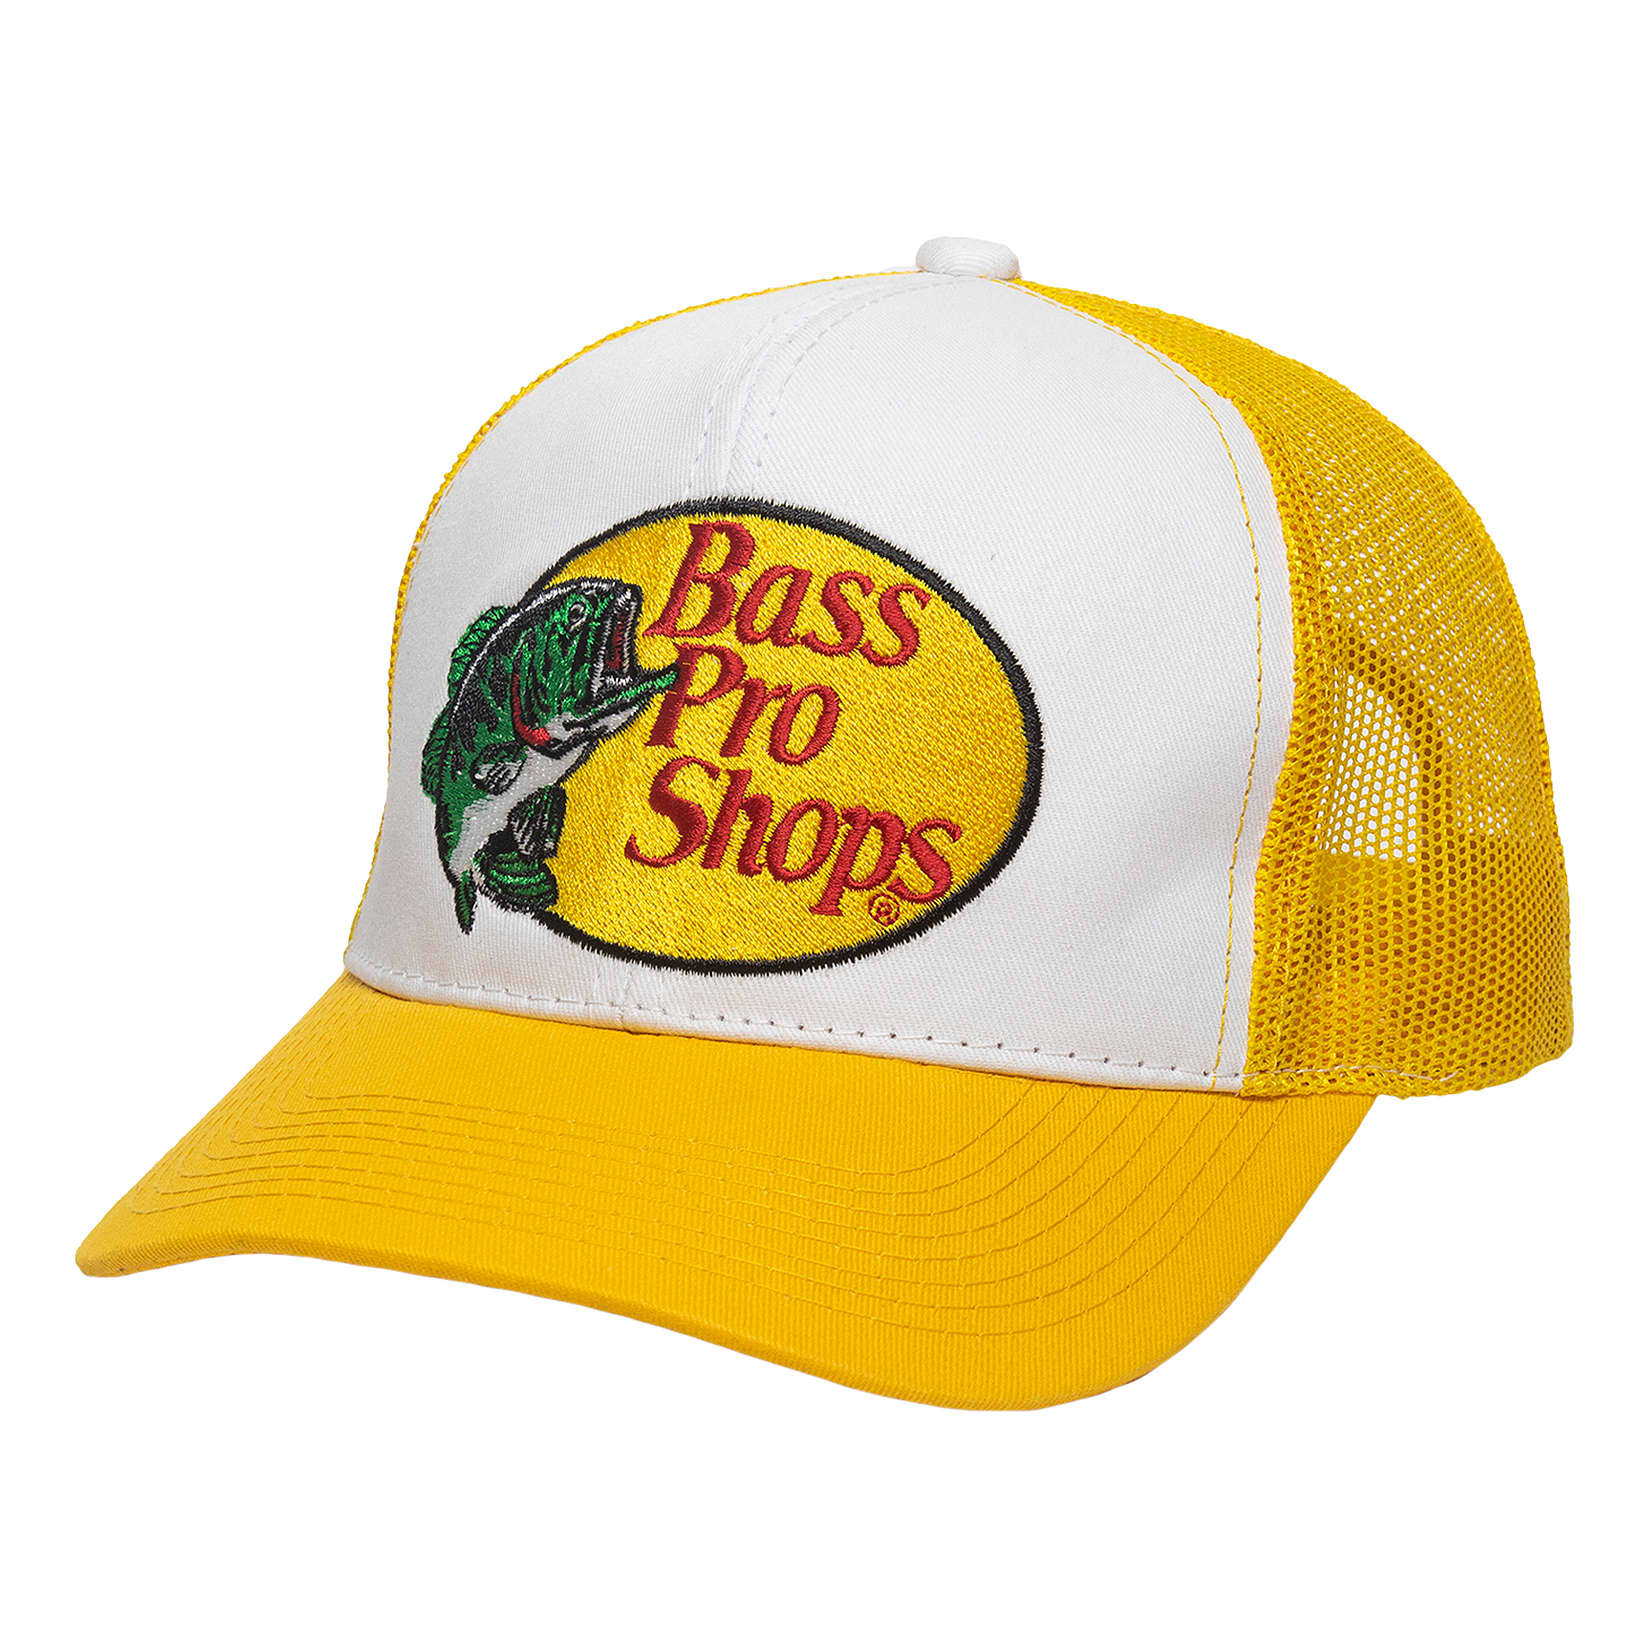 Bass Pro Shops® Embroidered Logo Mesh Caps - Gold